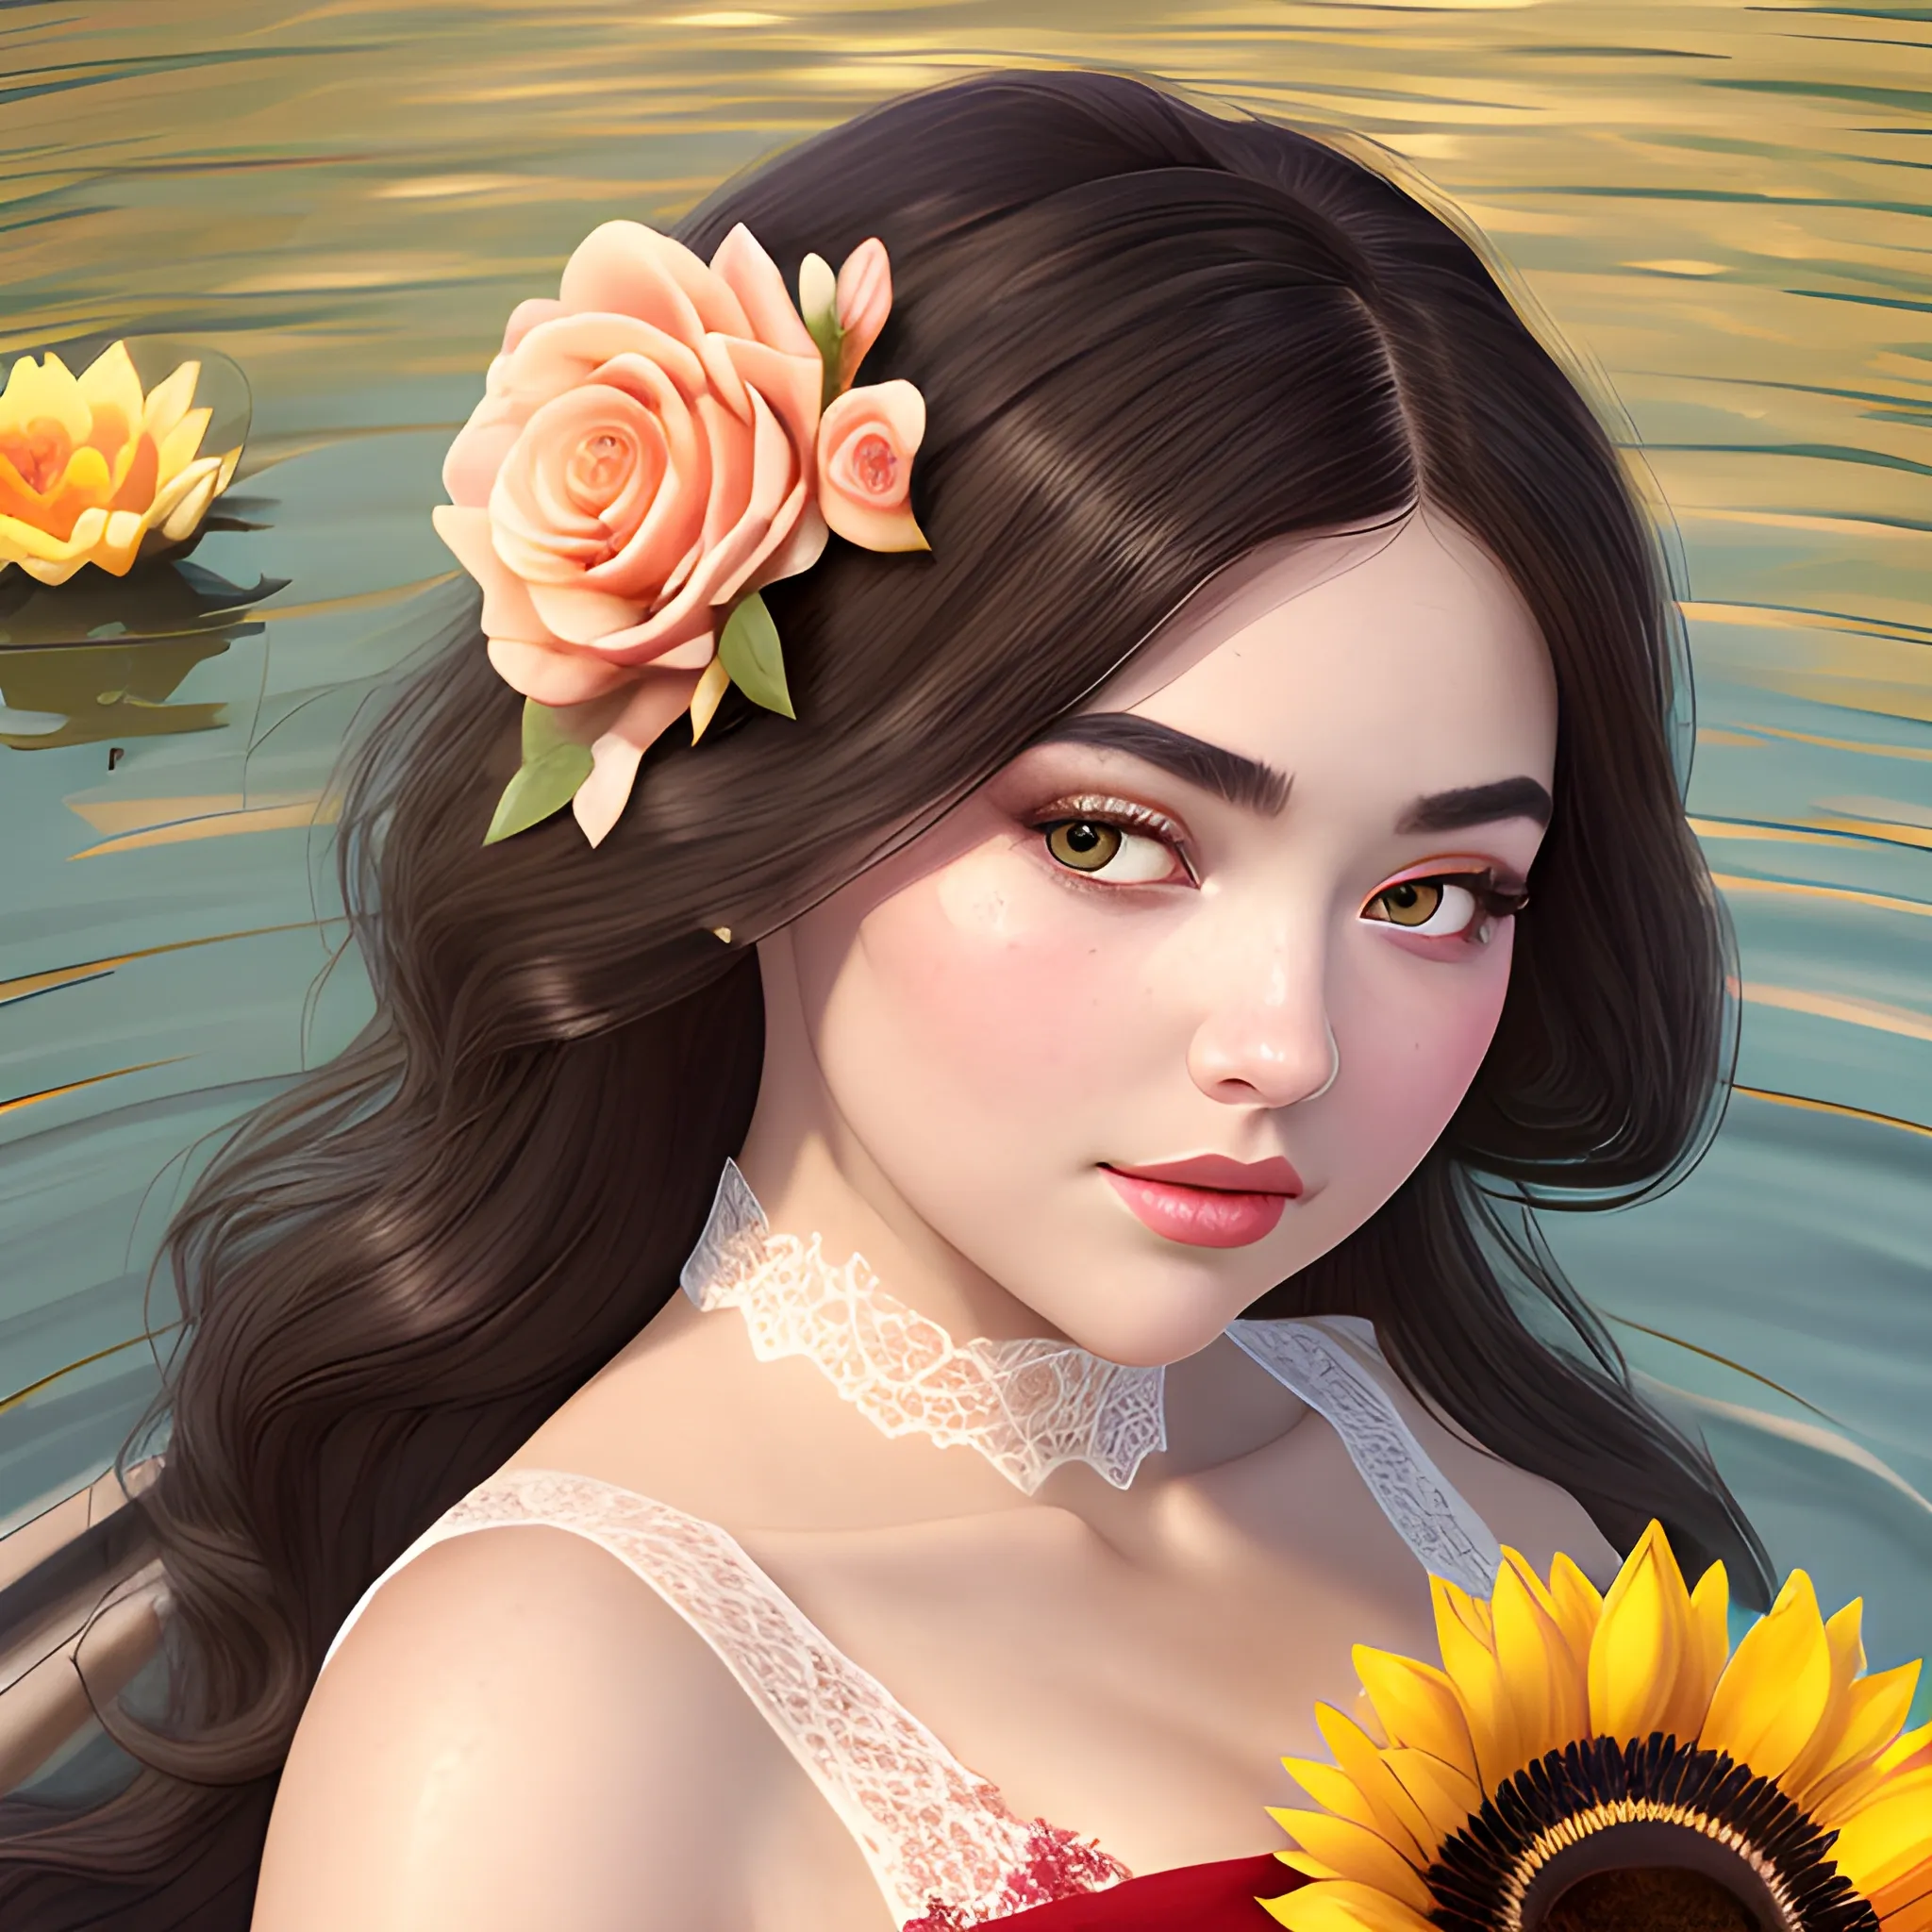 (((high detail))), best quality, Warm Colors, (detailed), (high resolution)Dark-haired female, curvy face, with rosy cheeks, big black eyes, thick eyelashes, thick peach lips, thick eyebrows, nose upturned, lying on dark water, holding a bouquet of flowers, a sunflower, a rose, a jasmine, a cherry blossom, a white lotus, wearing a red lace dress.